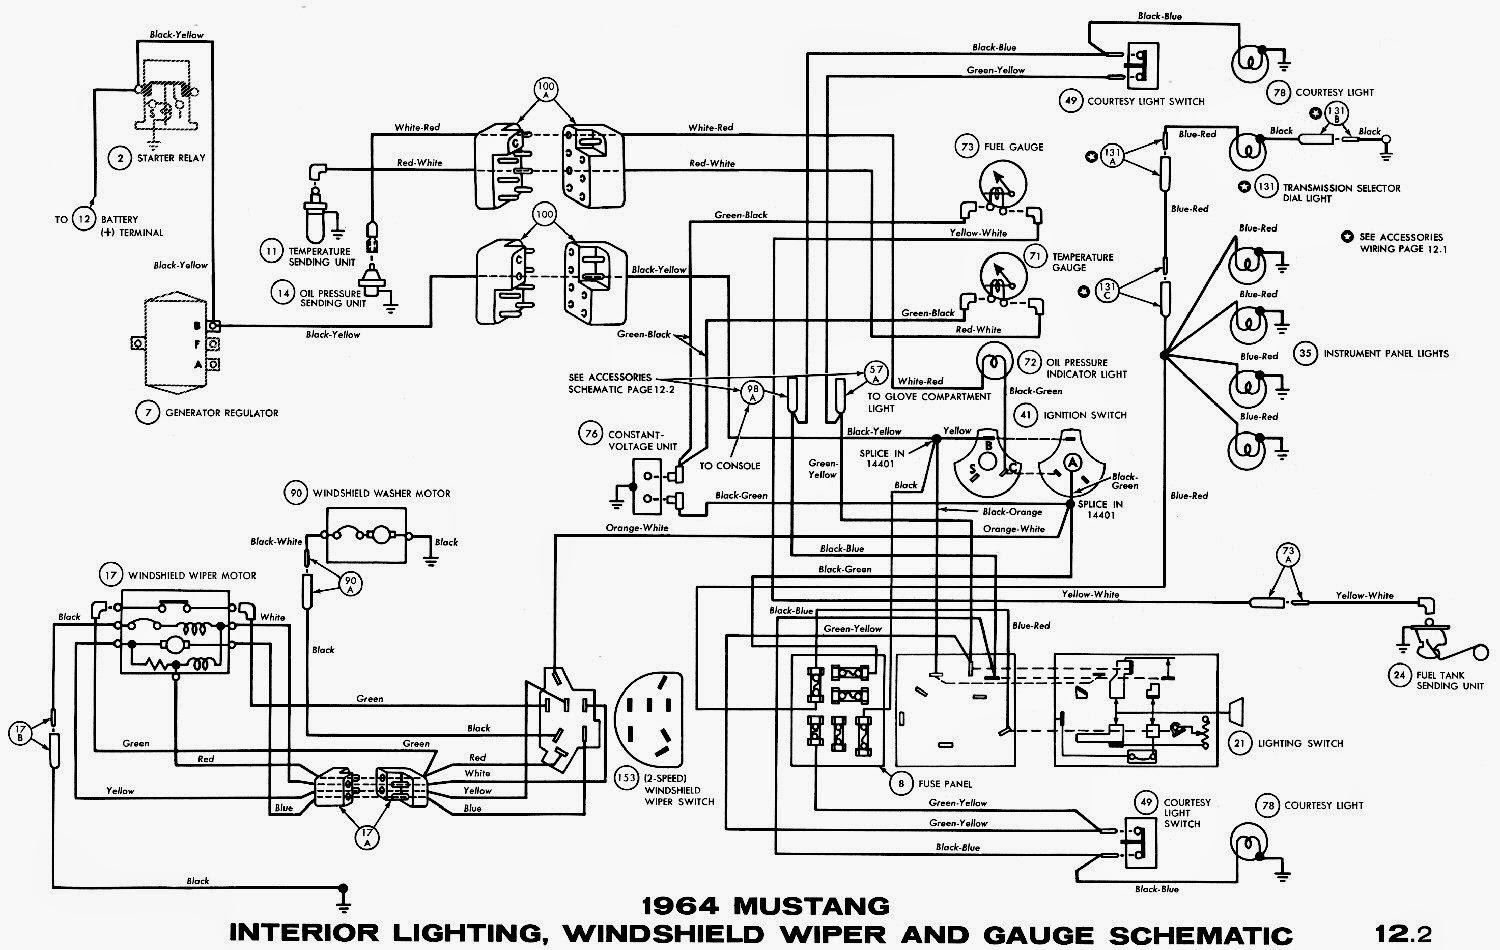 1964 Mustang Wiring Diagrams | Schematic Wiring Diagrams ... 1966 mustang interior wiring diagram 